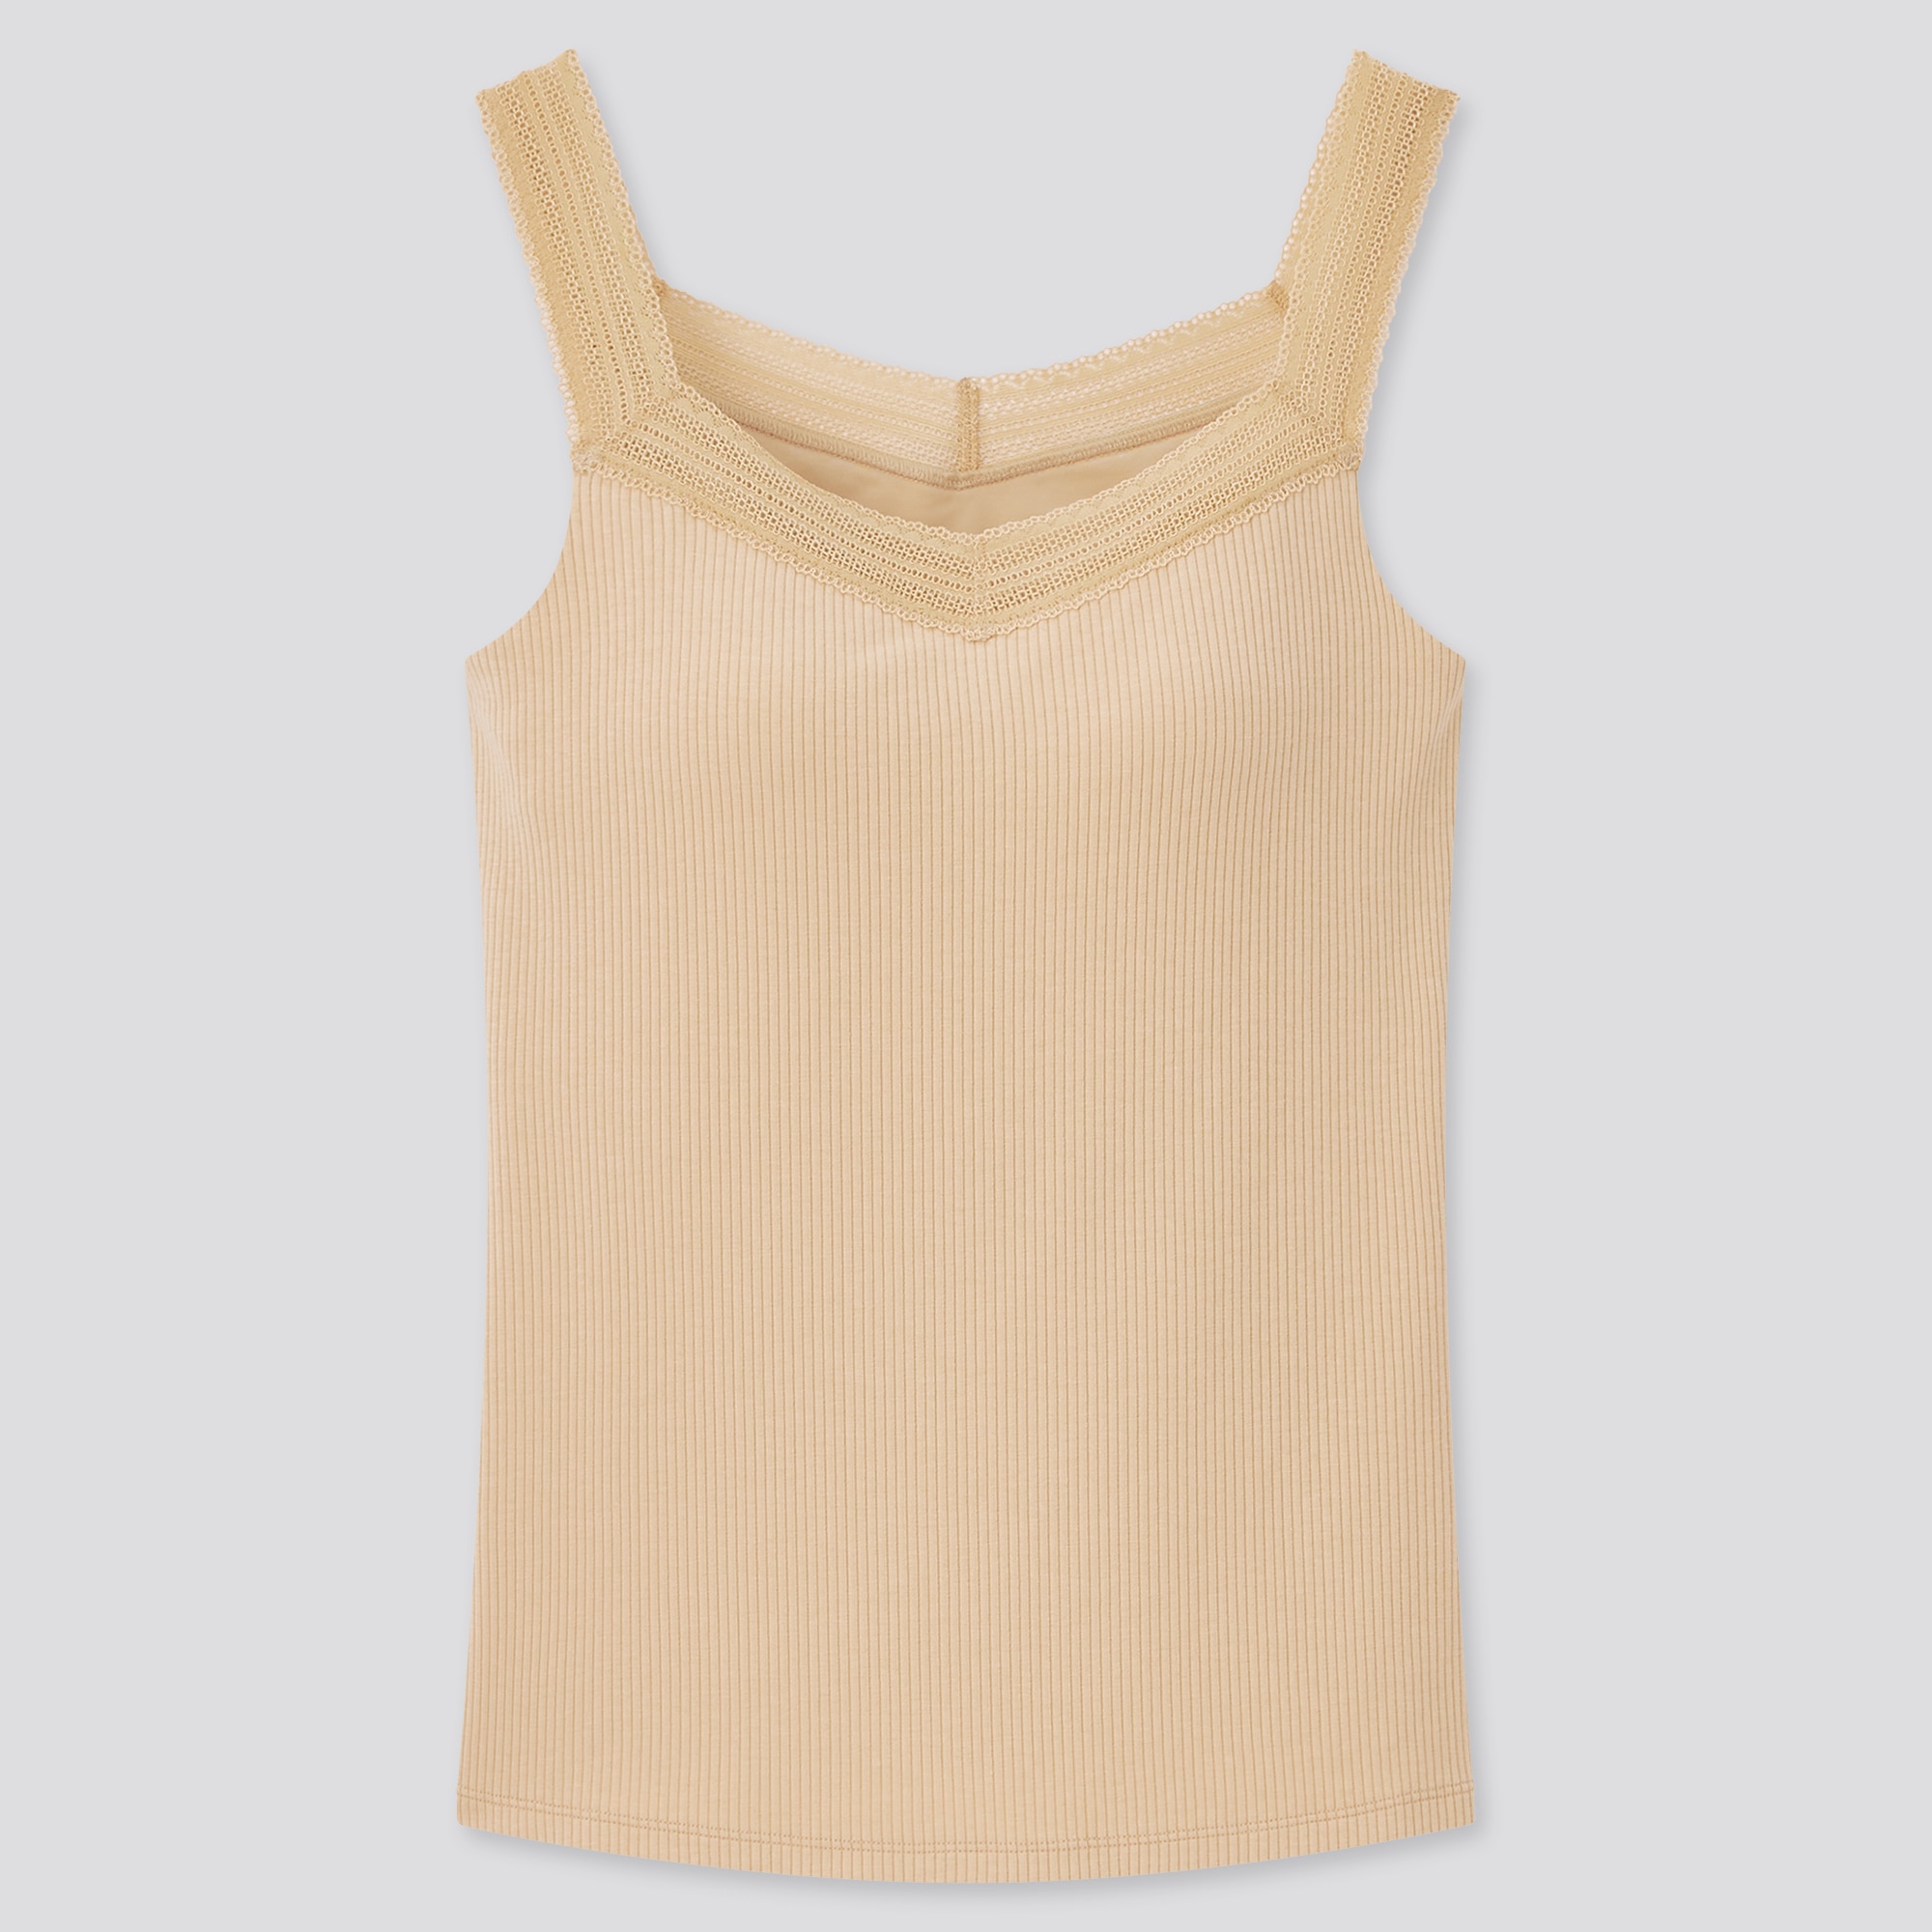 UNIQLO AIRism Sleeveless Bra Top S/M/L/XL 4Colors Tank with Cups